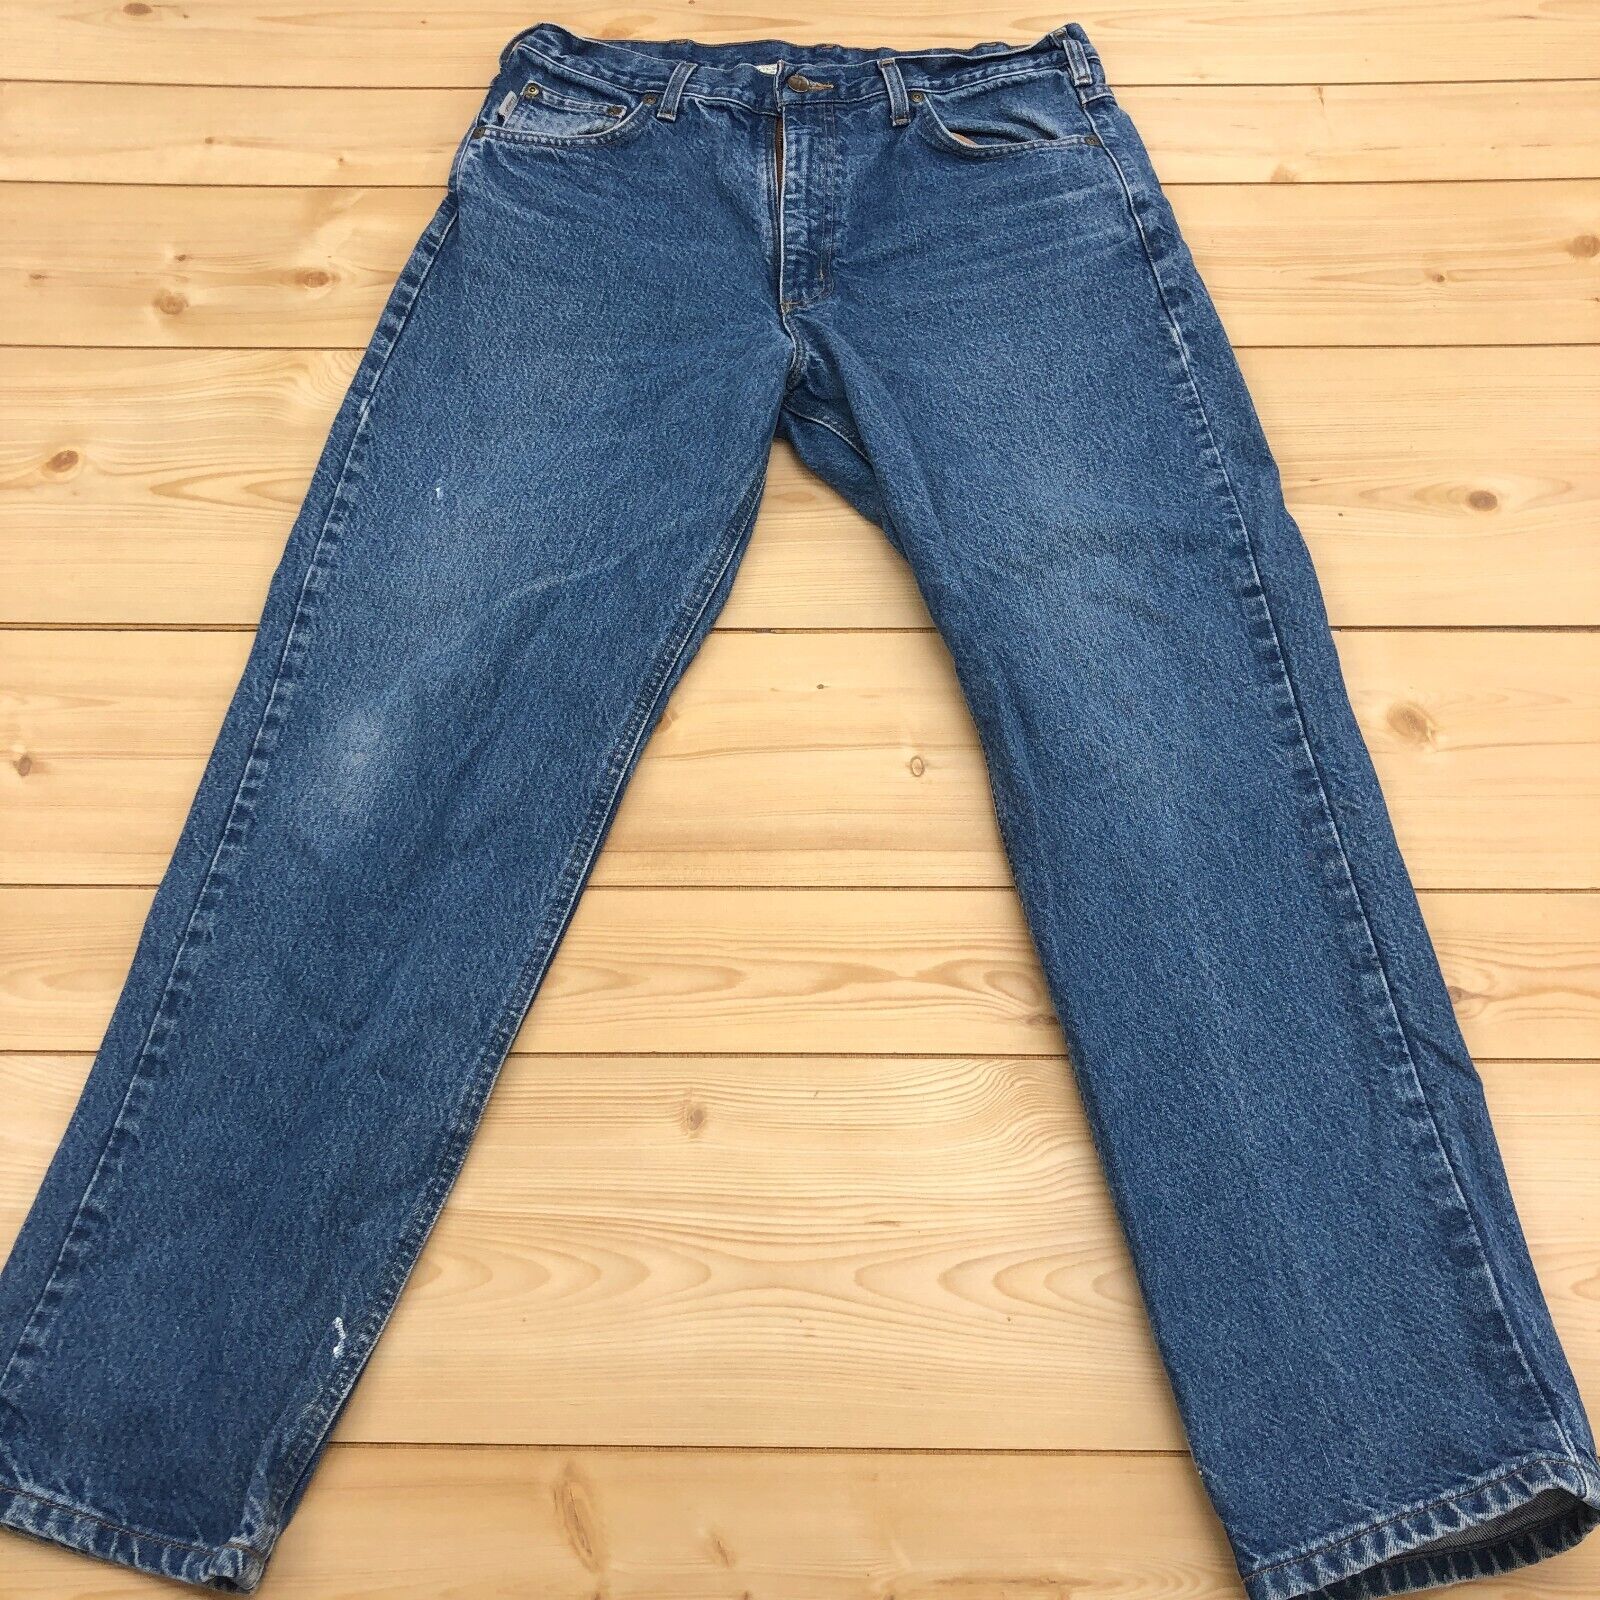 Vintage Carhartt Blue Mid Rise Relaxed Fit Straight Leg Jeans Men Size 36 X 32